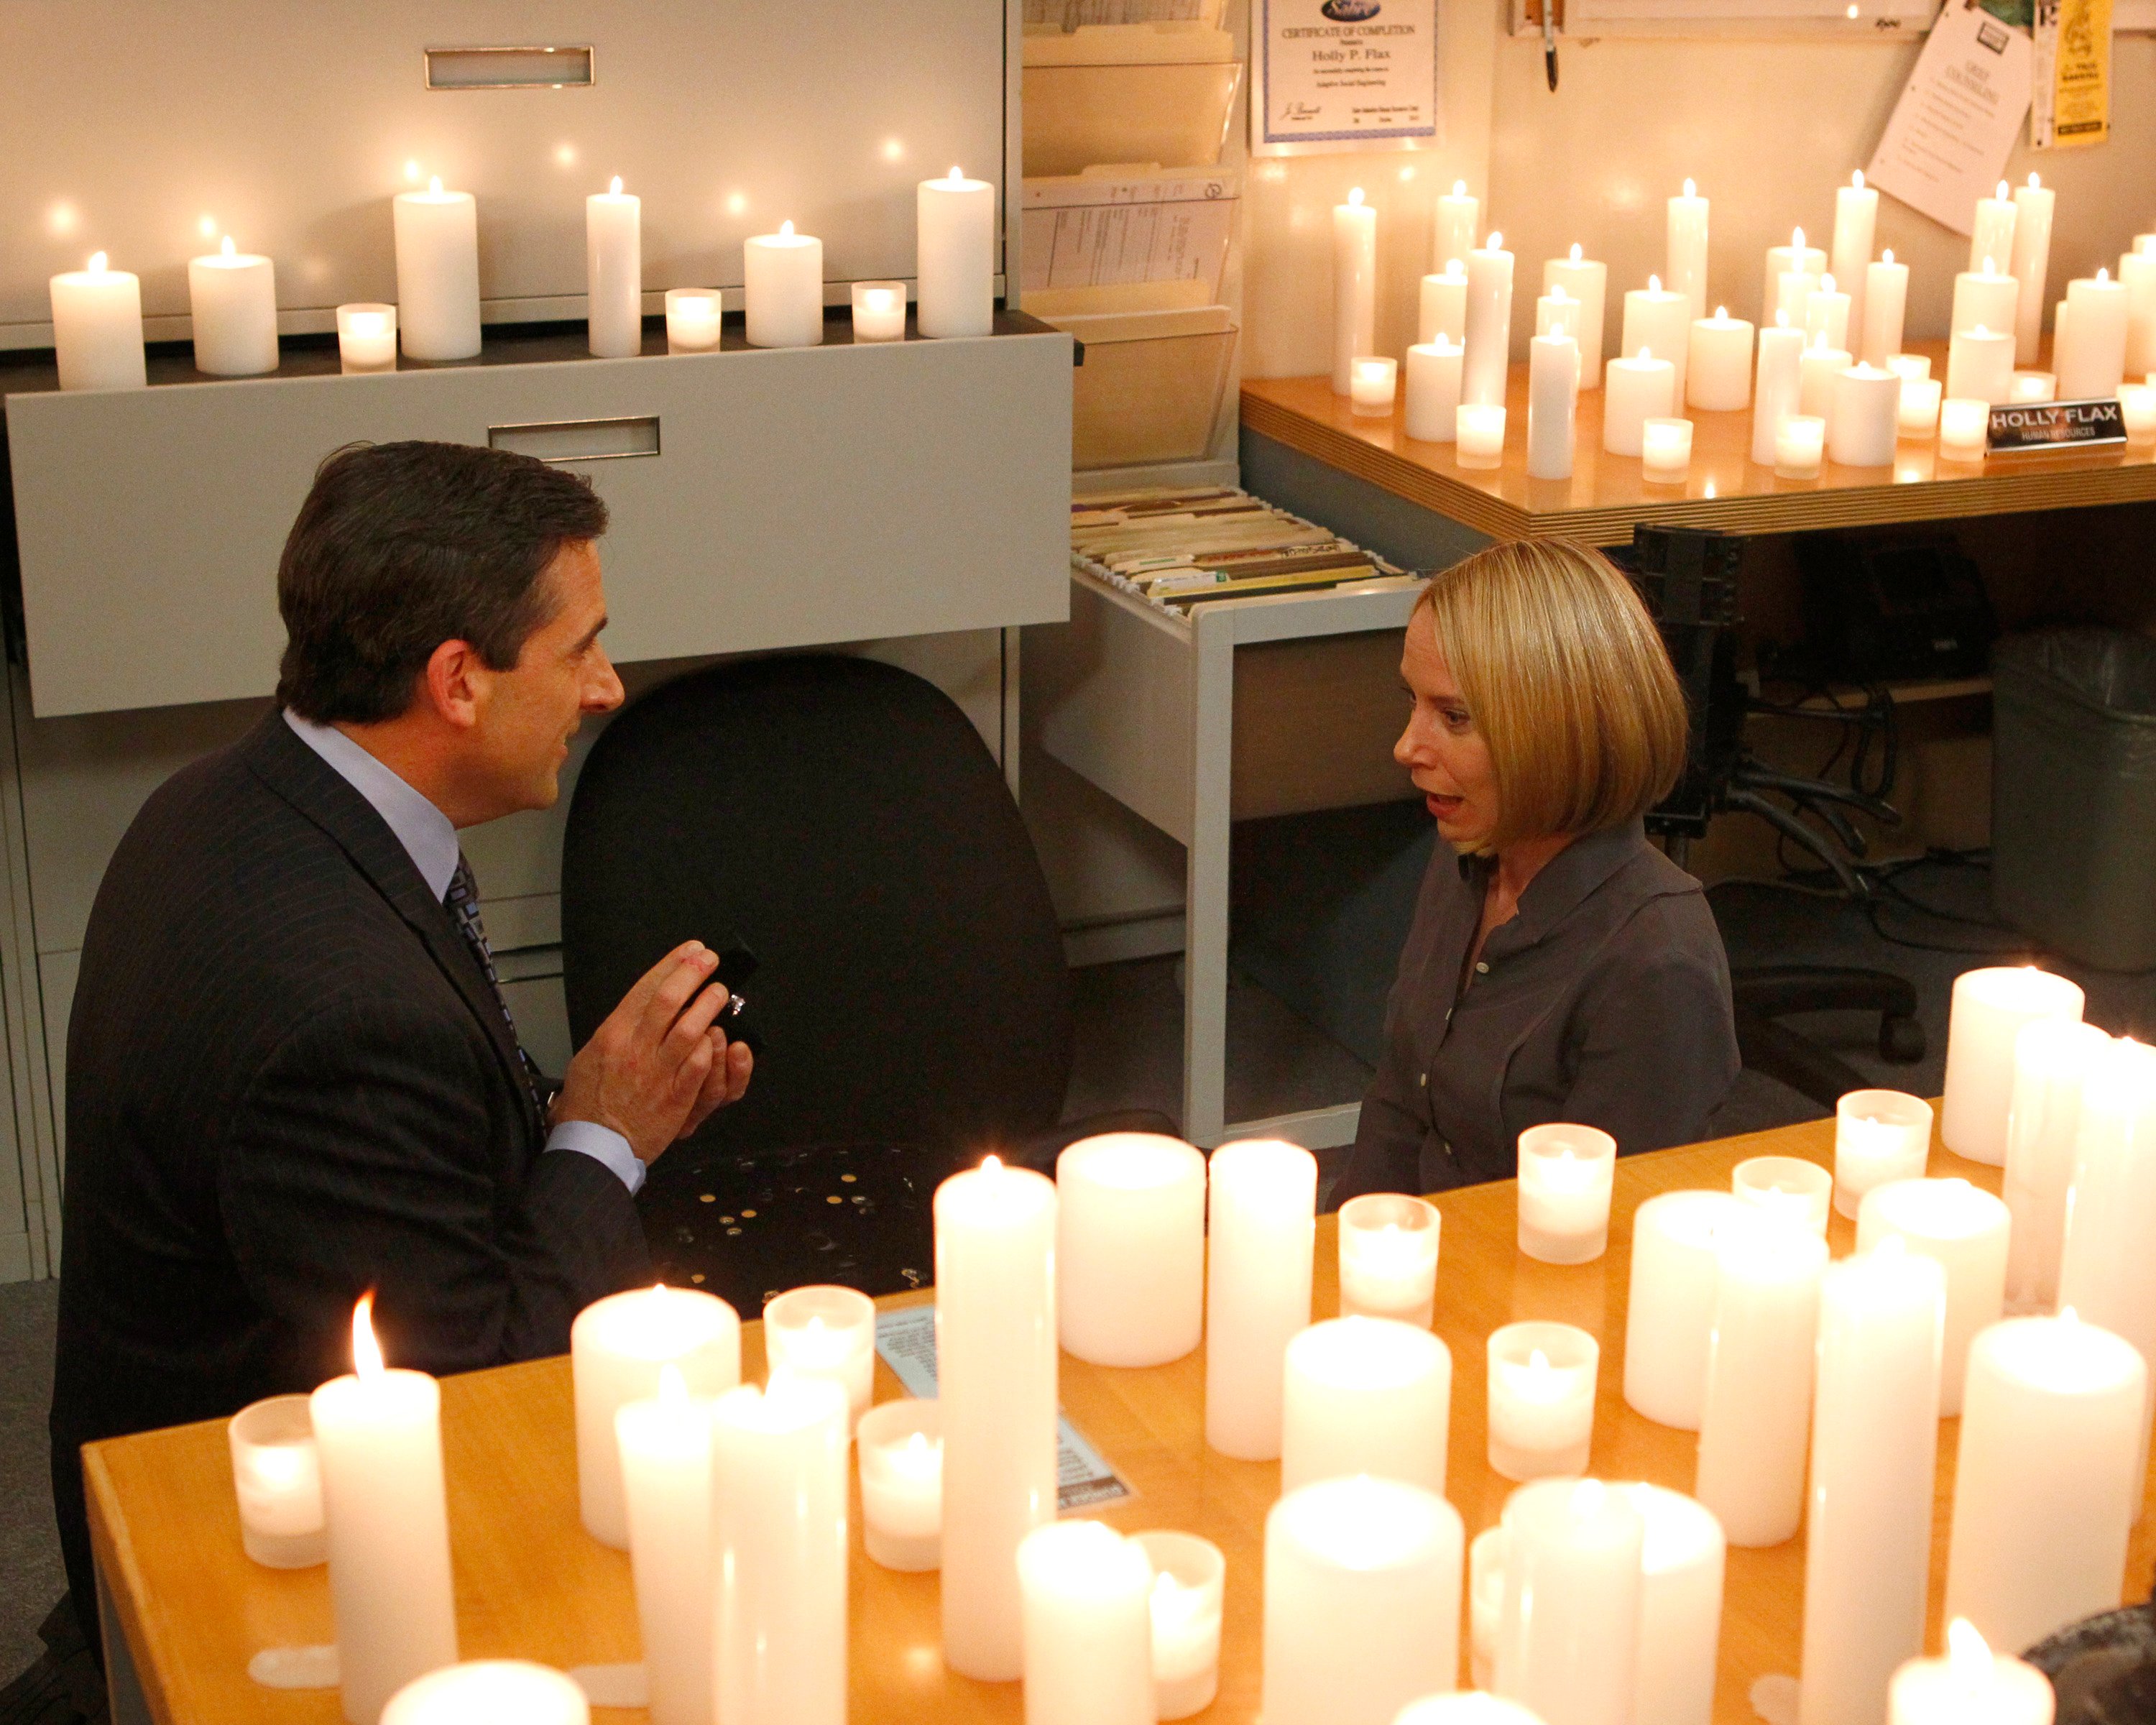 Michael Scott, played by Steve Carell, proposes to Holly Flax, played by Amy Ryan, in 'The Office'